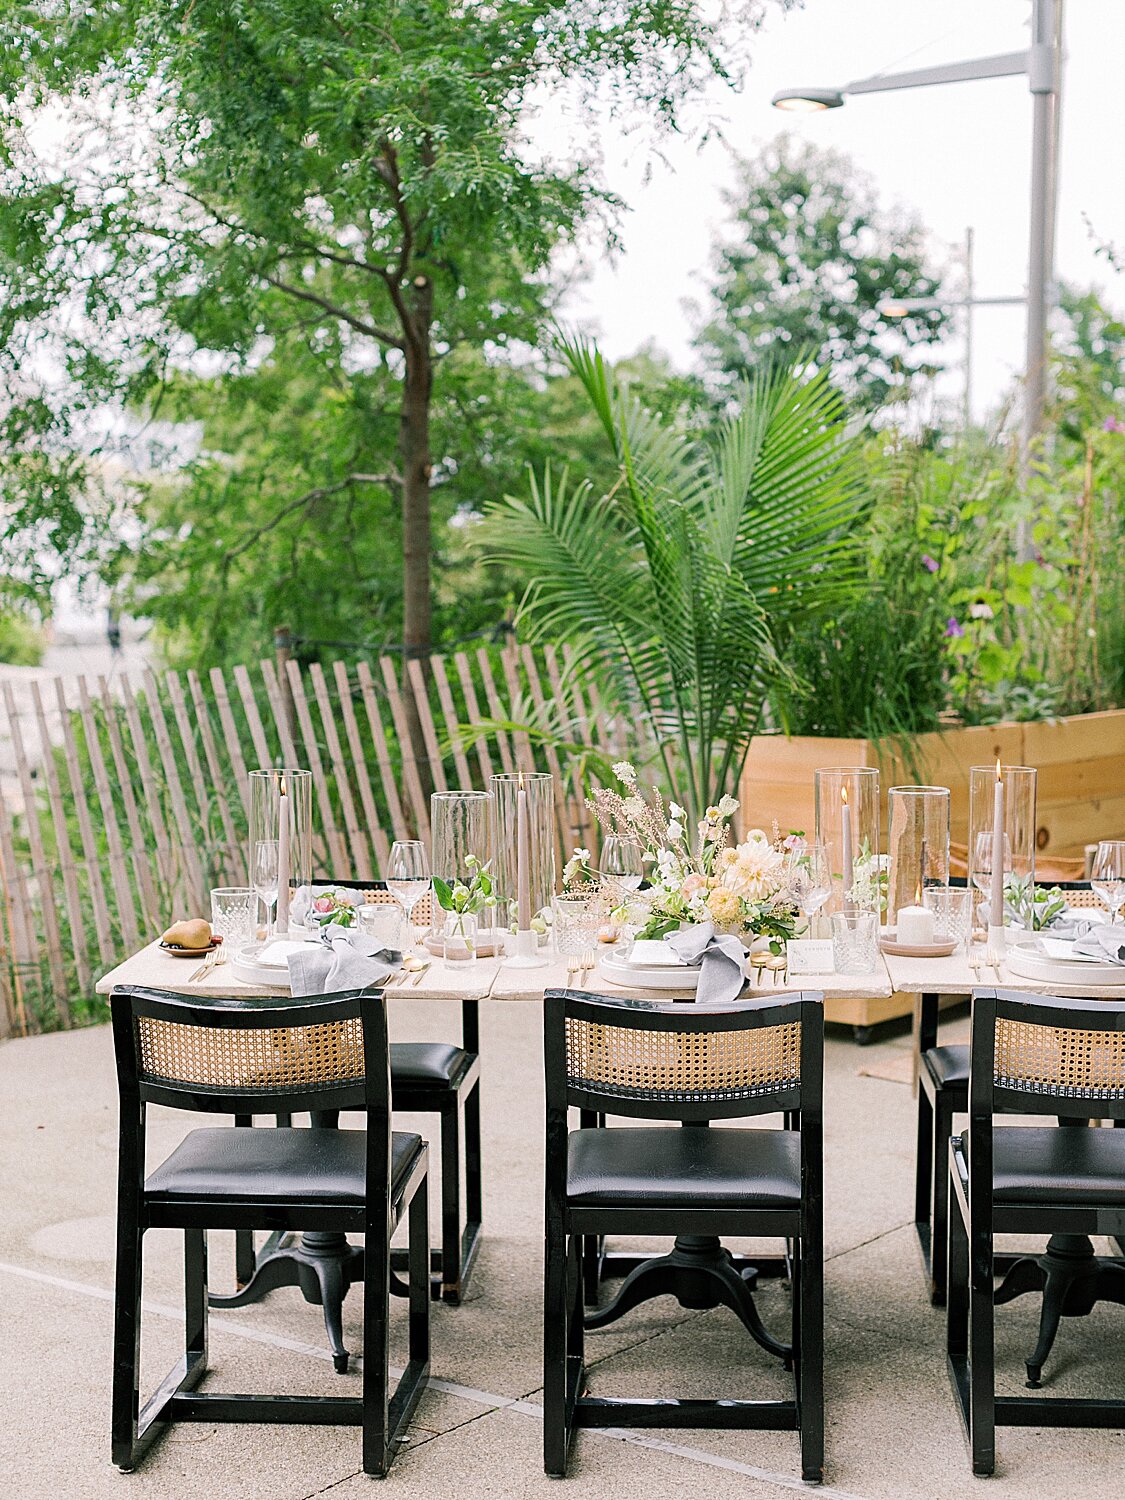 outdoor reception seating for intimate wedding ceremony | Asher Gardner Photography | Intimate Ceremony in DUMBO New York